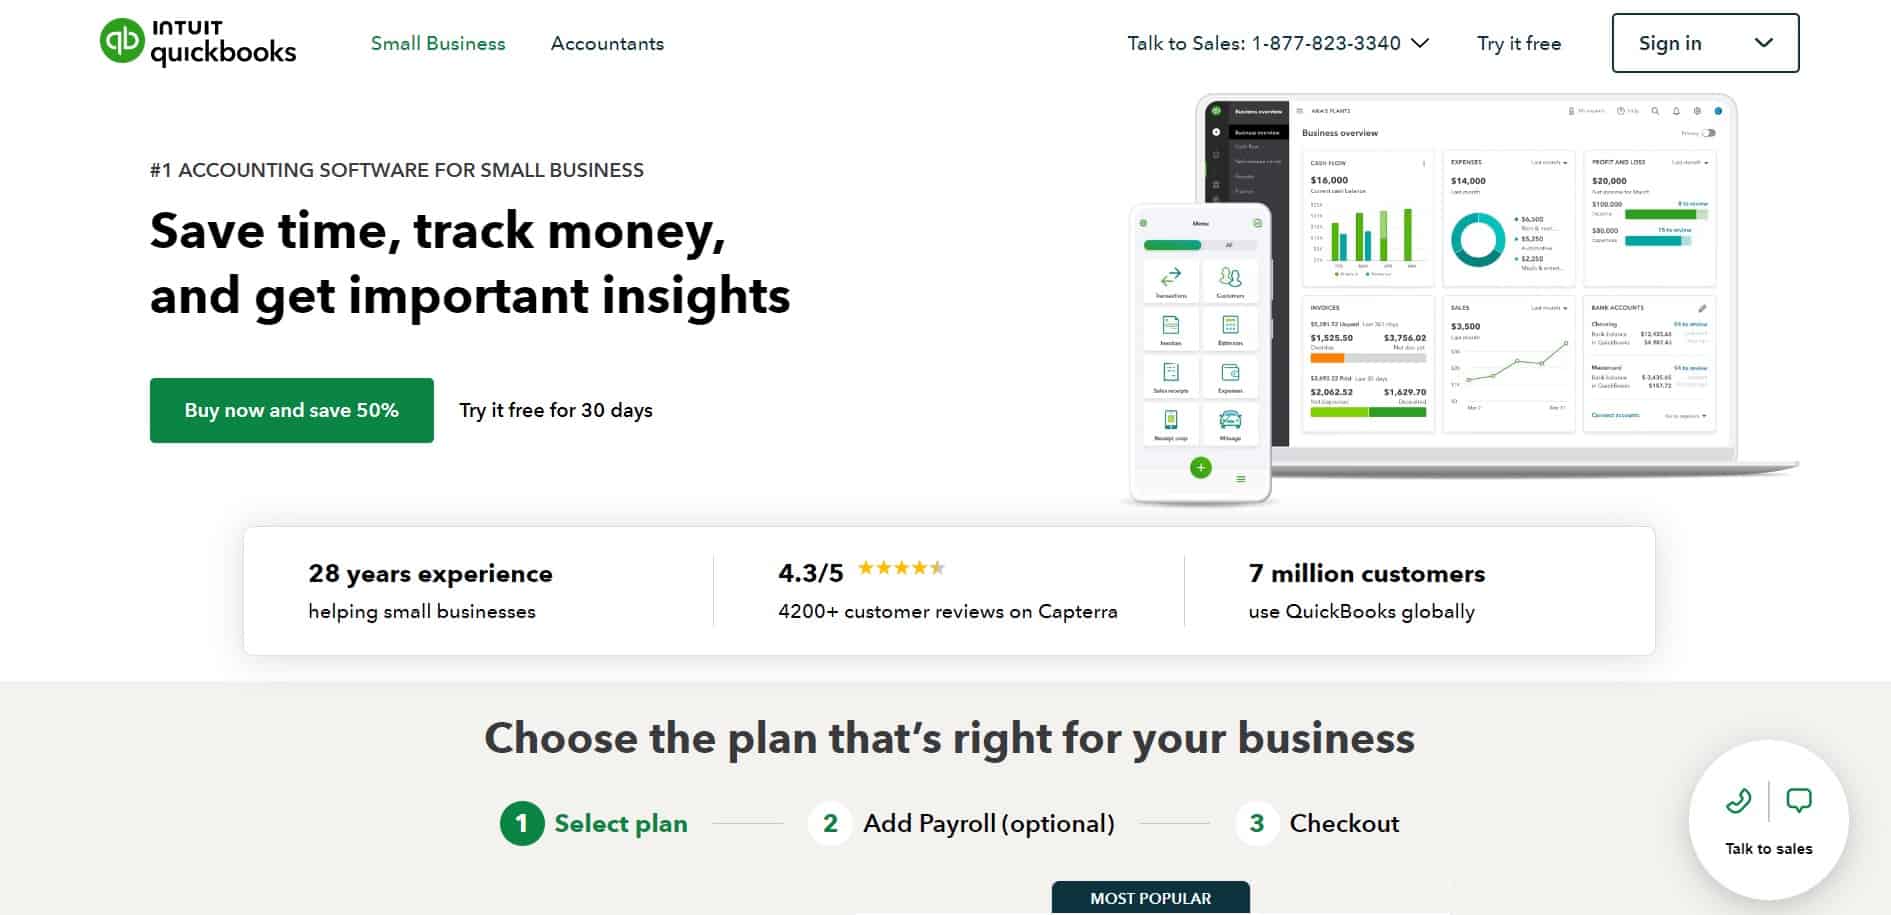 QuickBooks homepage, a very important electrical contractor software used for accounting by contractors